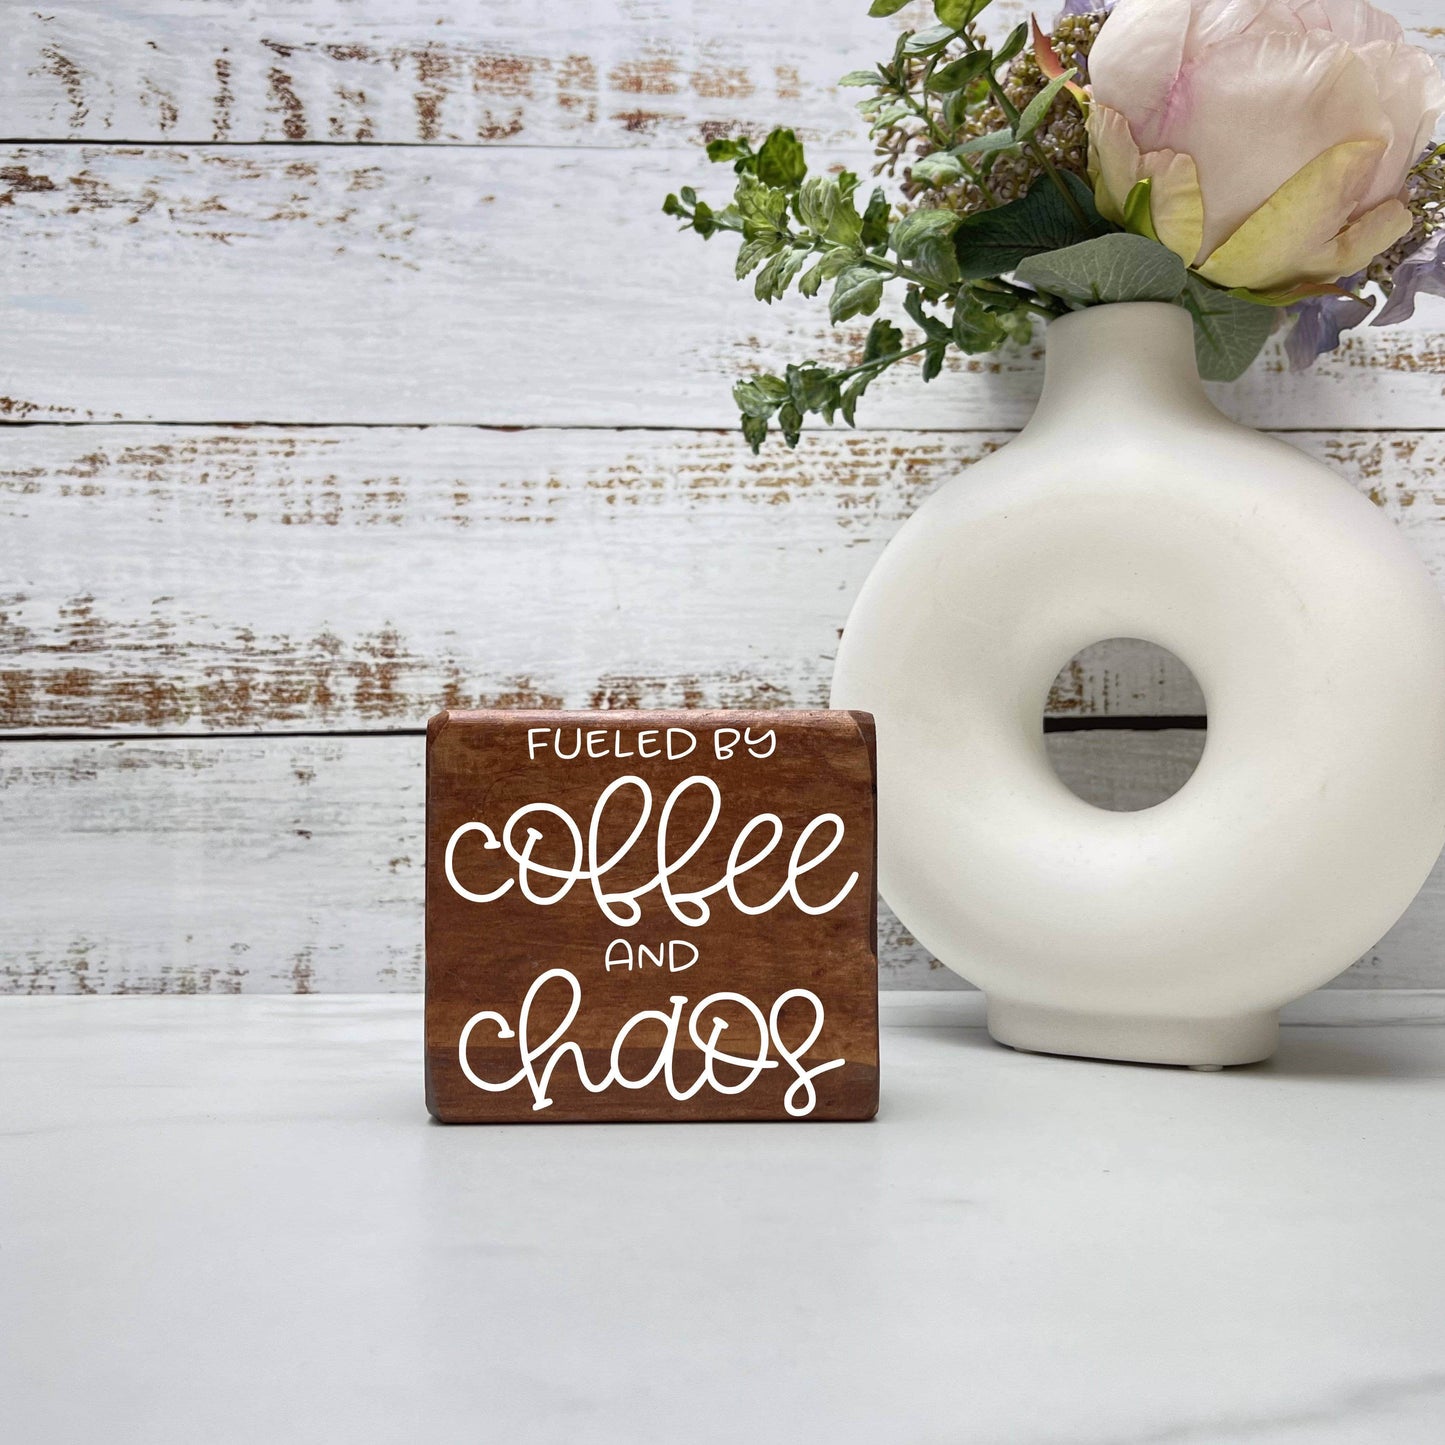 Fueled by Coffee and Chaos, kitchen wood sign, kitchen decor, home decor